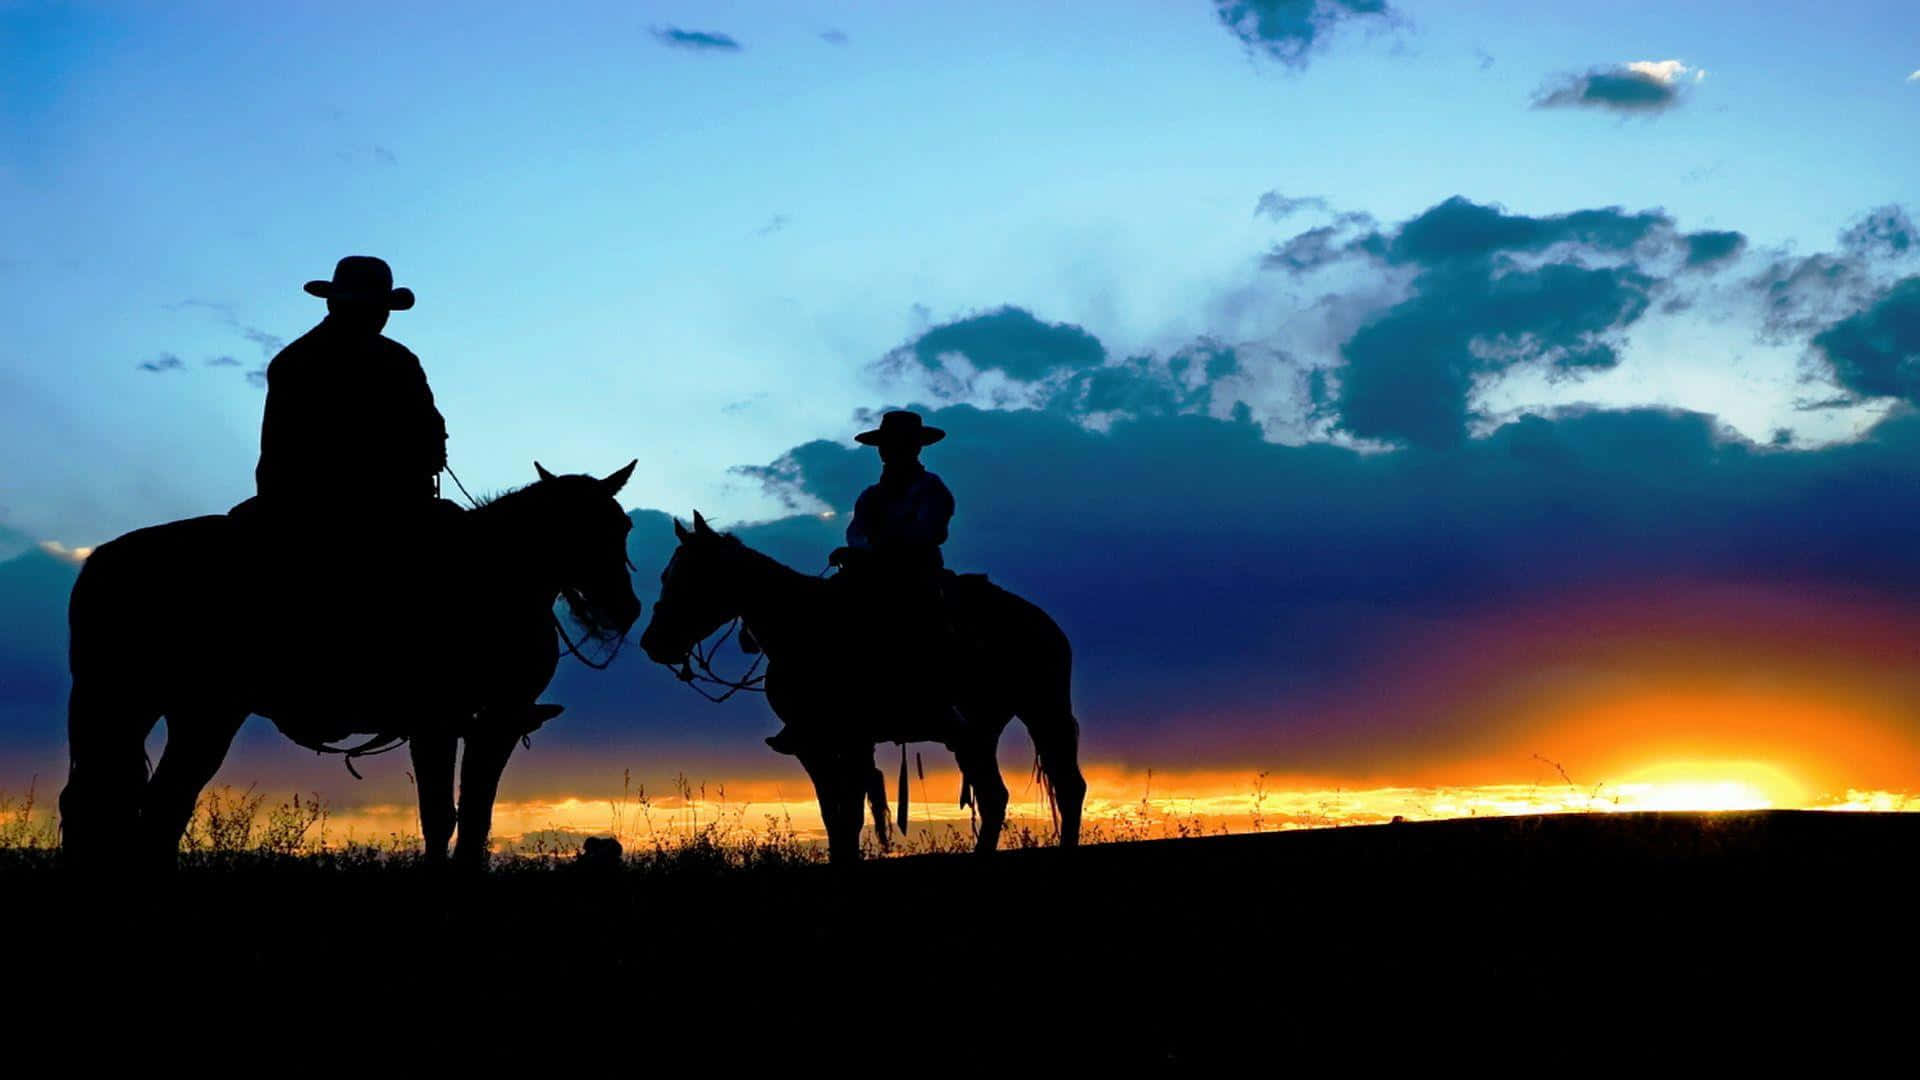 Silhouette of Cowboys Riding on Horseback at Sunset